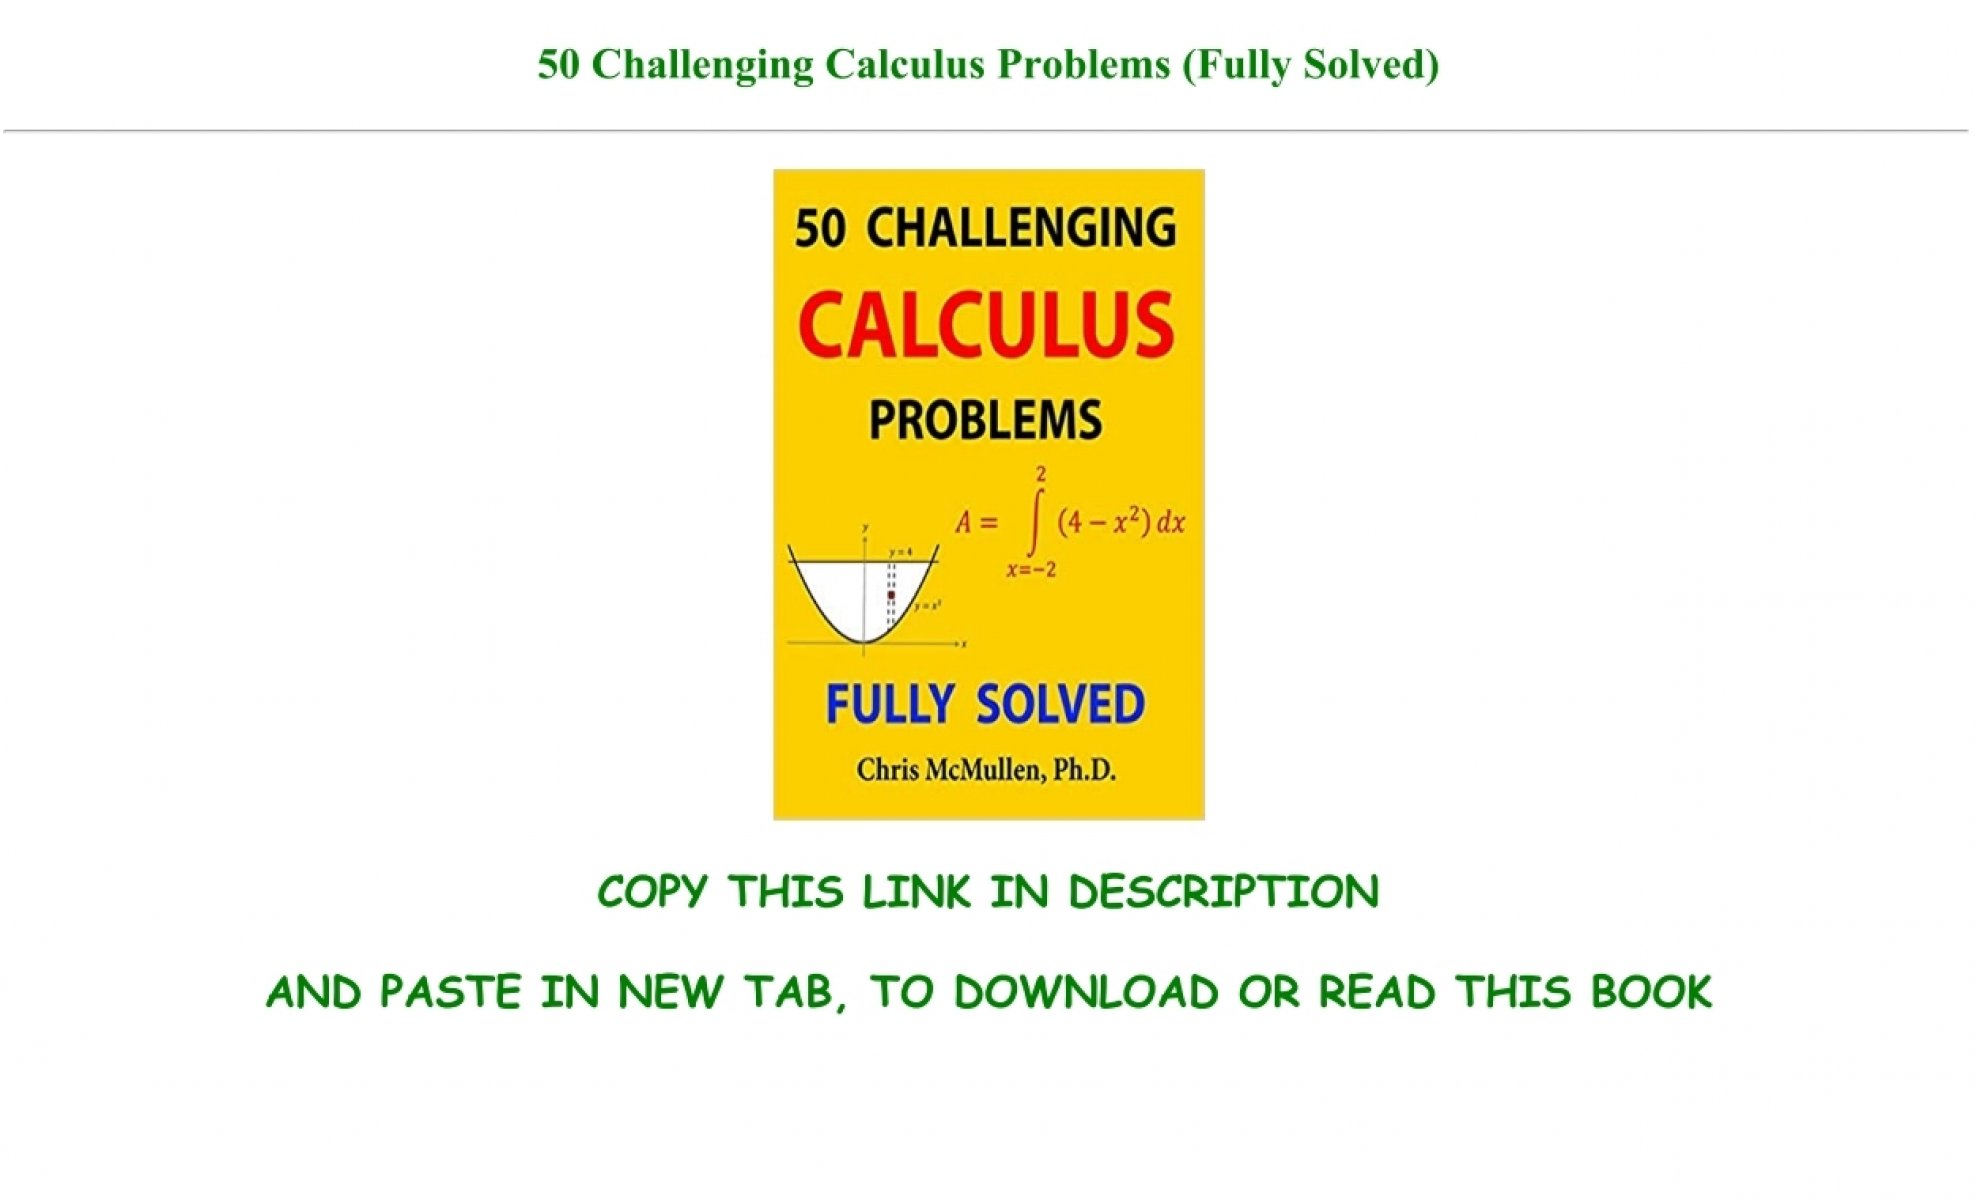 50 challenging calculus problems (fully solved) pdf